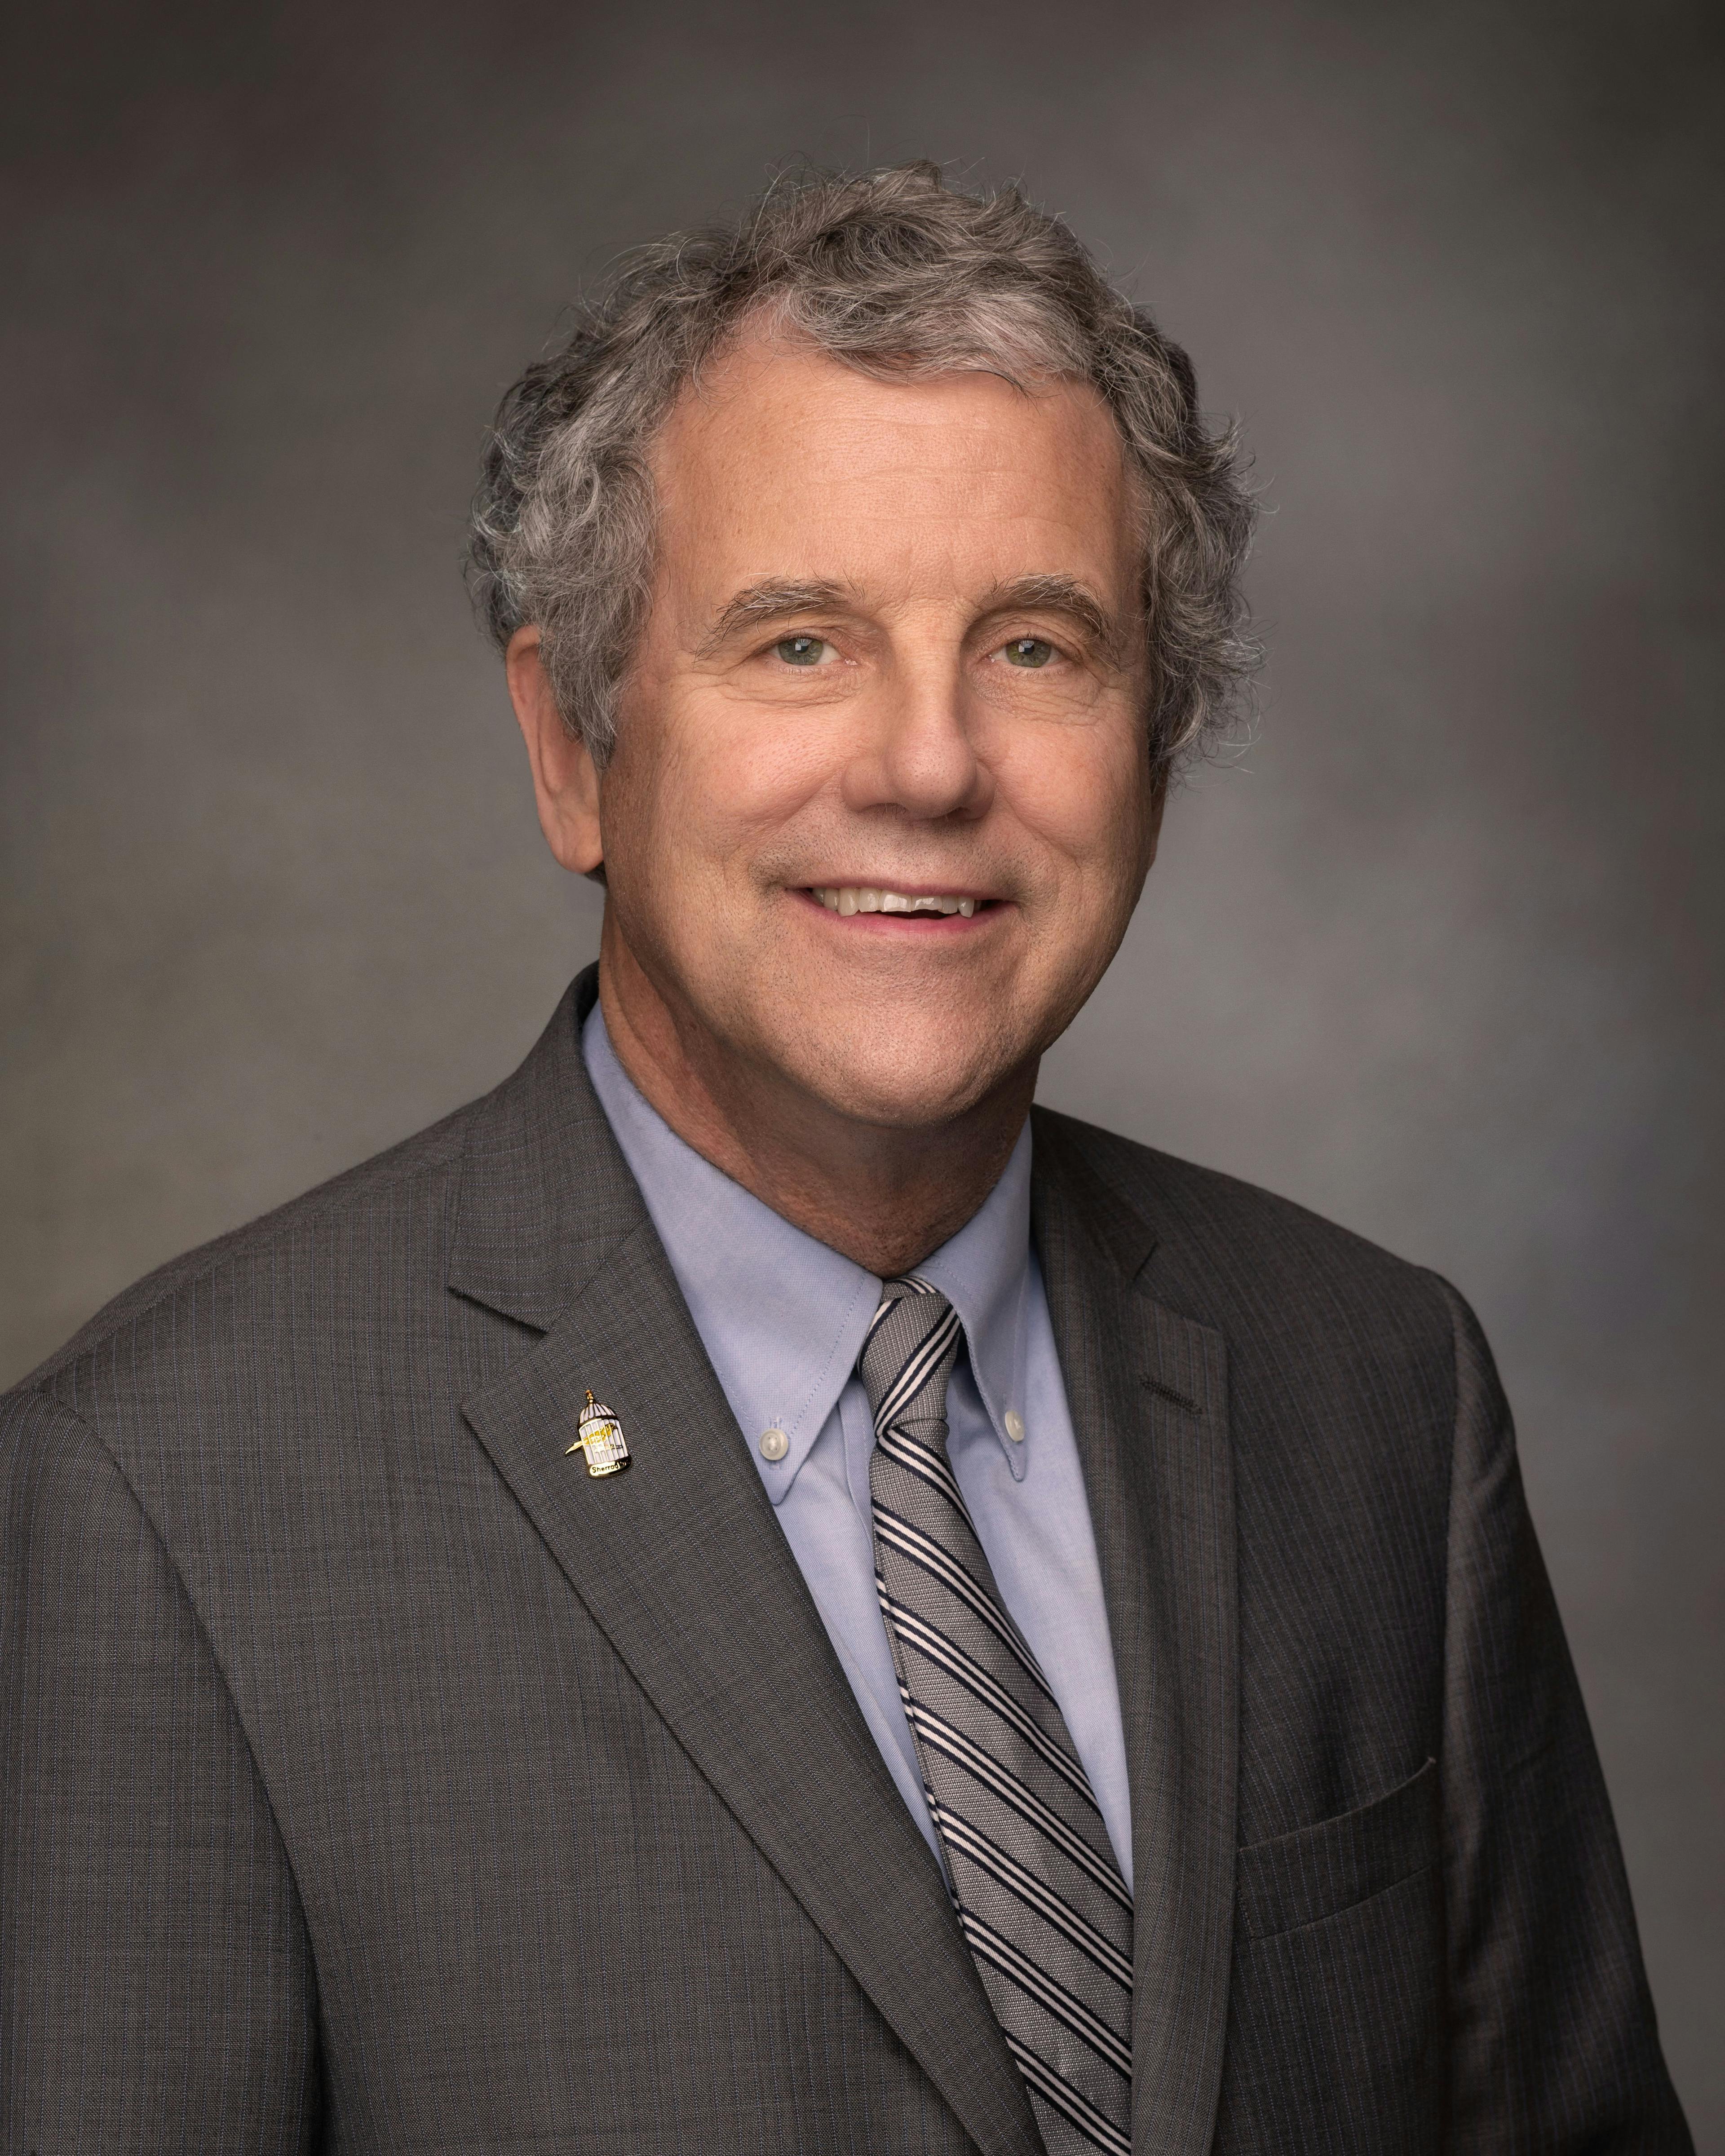 U.S. Sen. Sherrod Brown, D-Ohio, and nearly 300 other lawmakers are asking the CMS to streamline prior authorization in Medicare Advantage plans. (Photo: U.S. Senate)